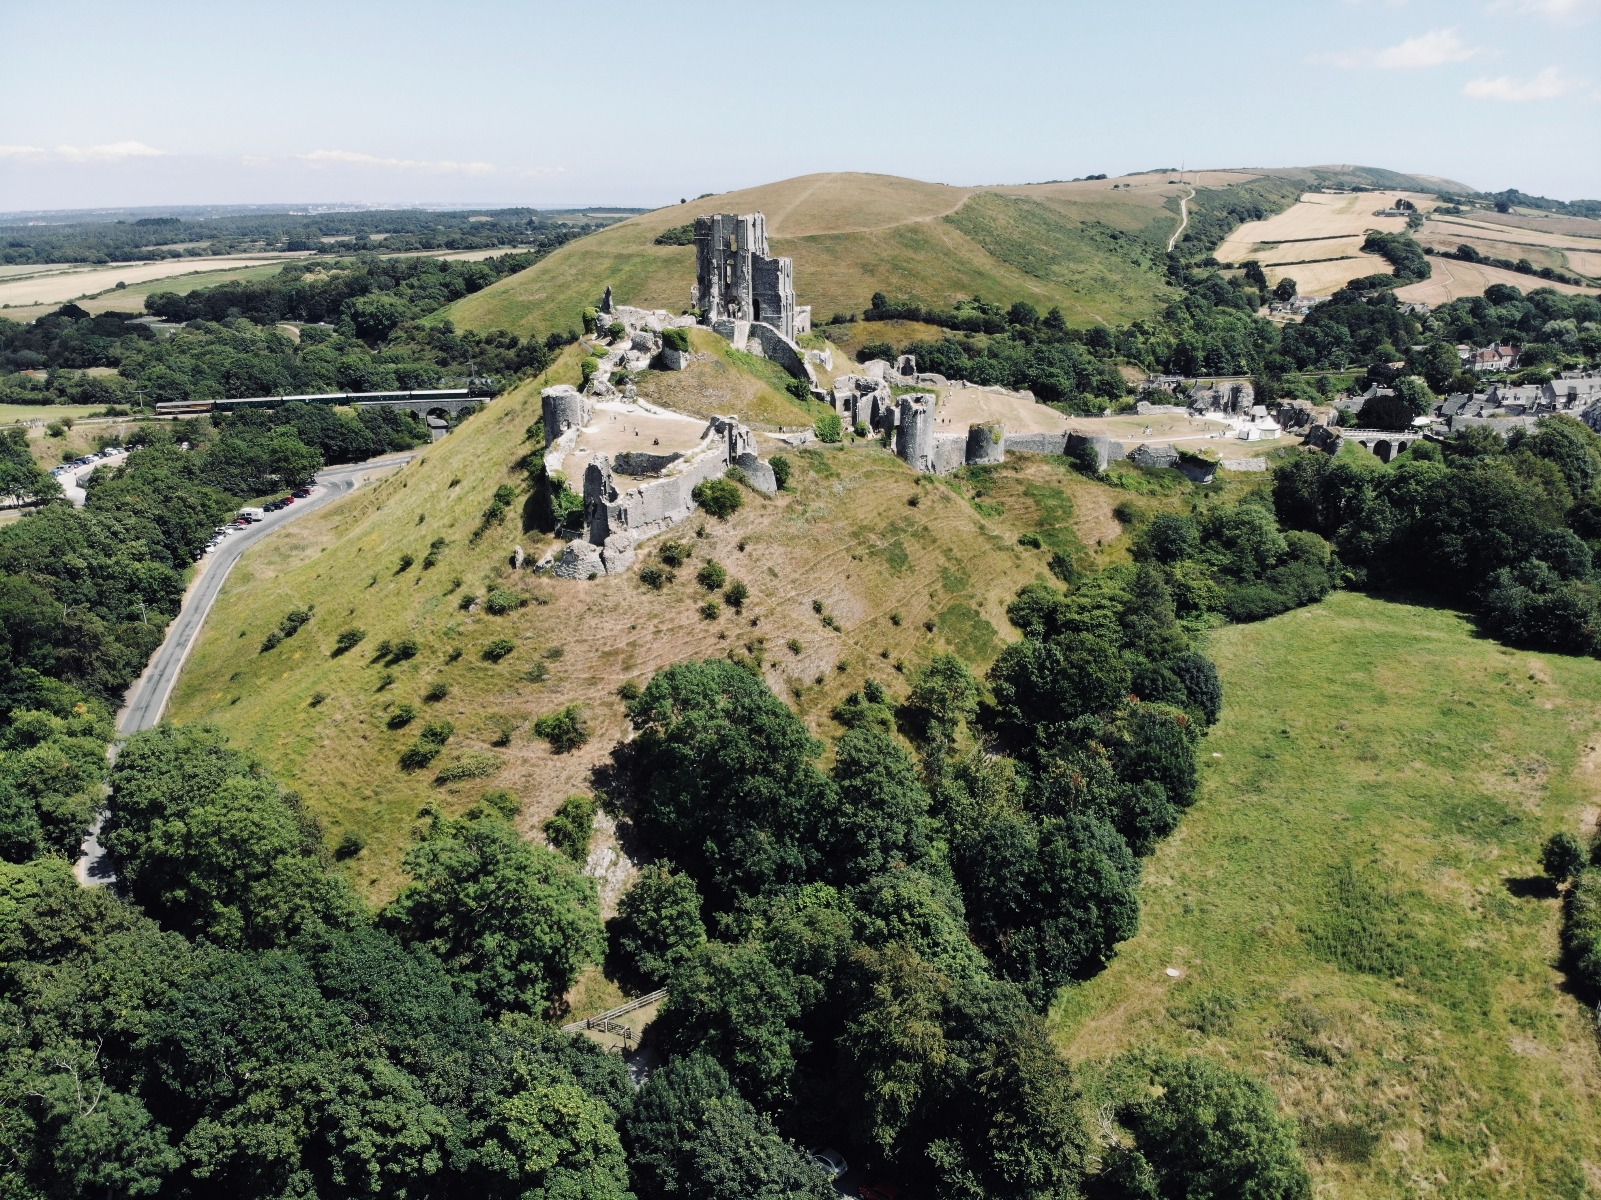 Corfe Castle is just one of many spectacular sights to enjoy in Dorset.